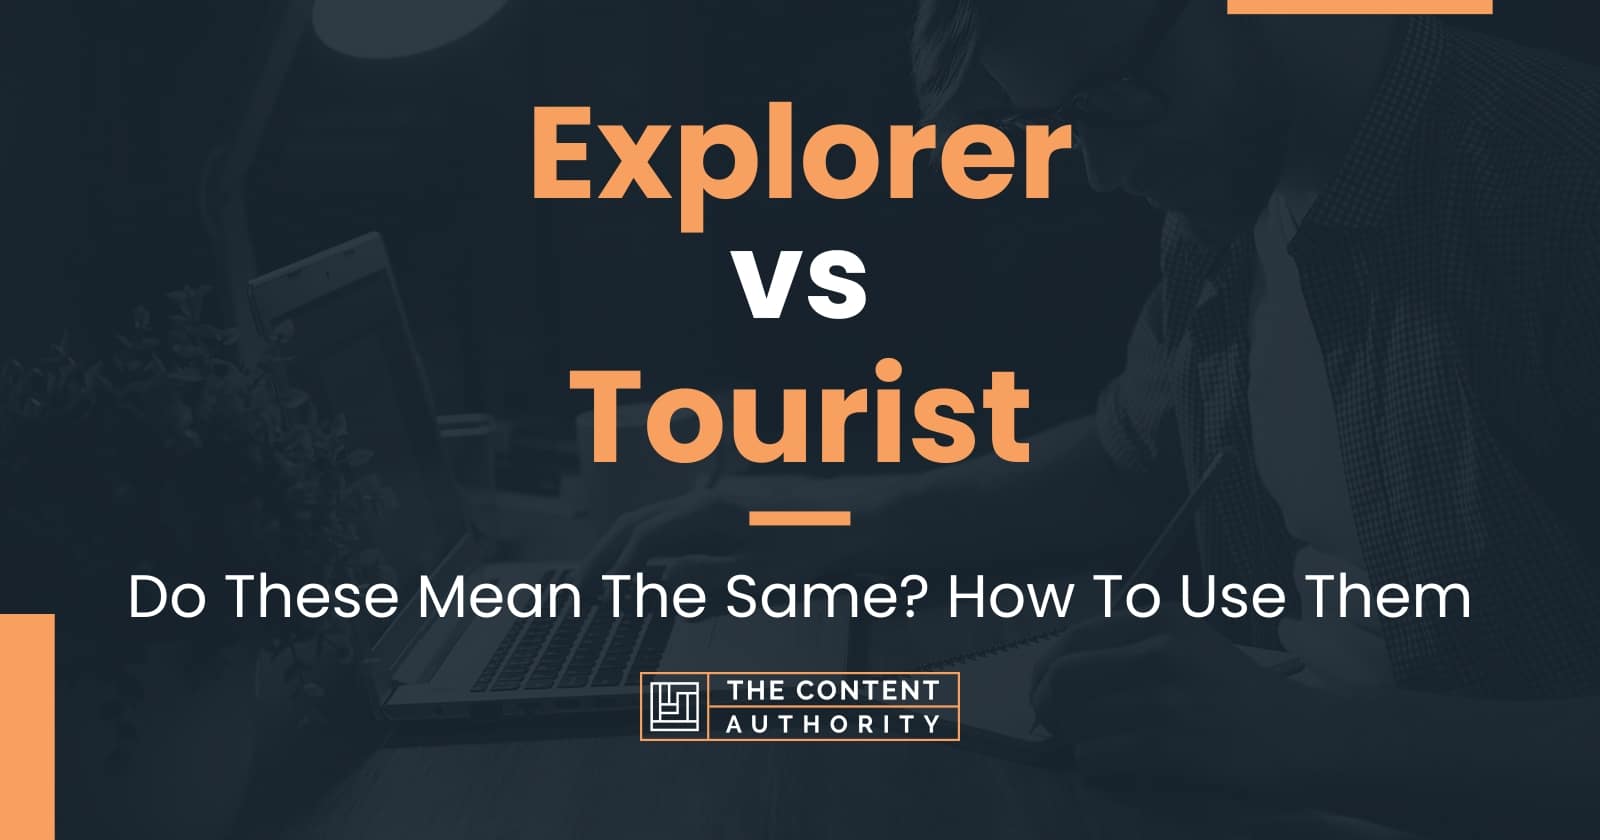 explorer tourist meaning